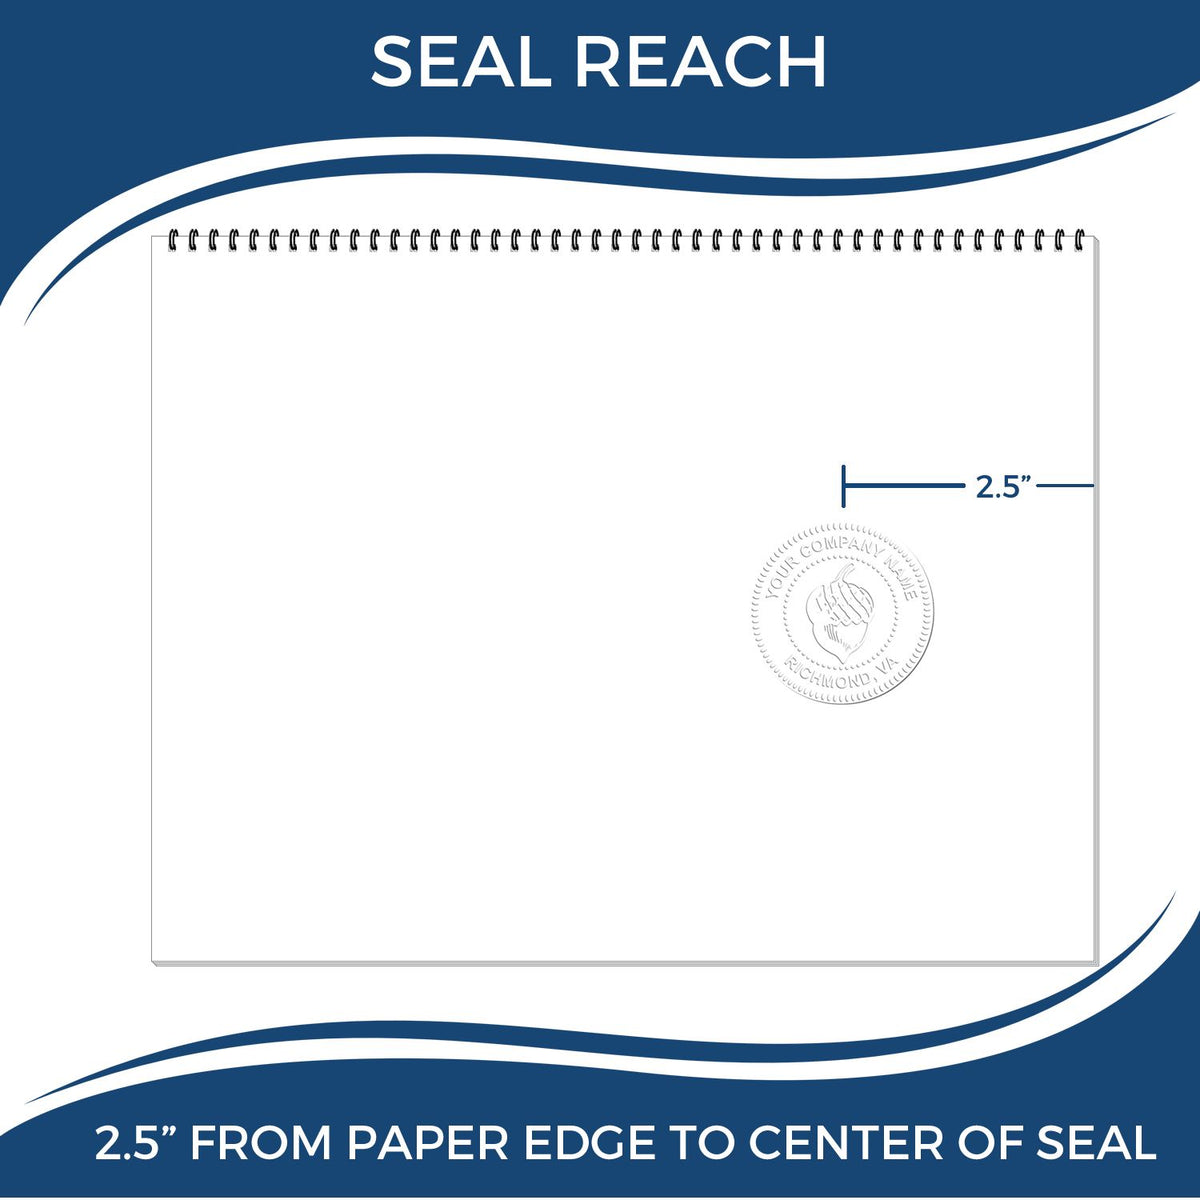 An infographic showing the seal reach which is represented by a ruler and a miniature seal image of the Heavy Duty Cast Iron Maine Engineer Seal Embosser